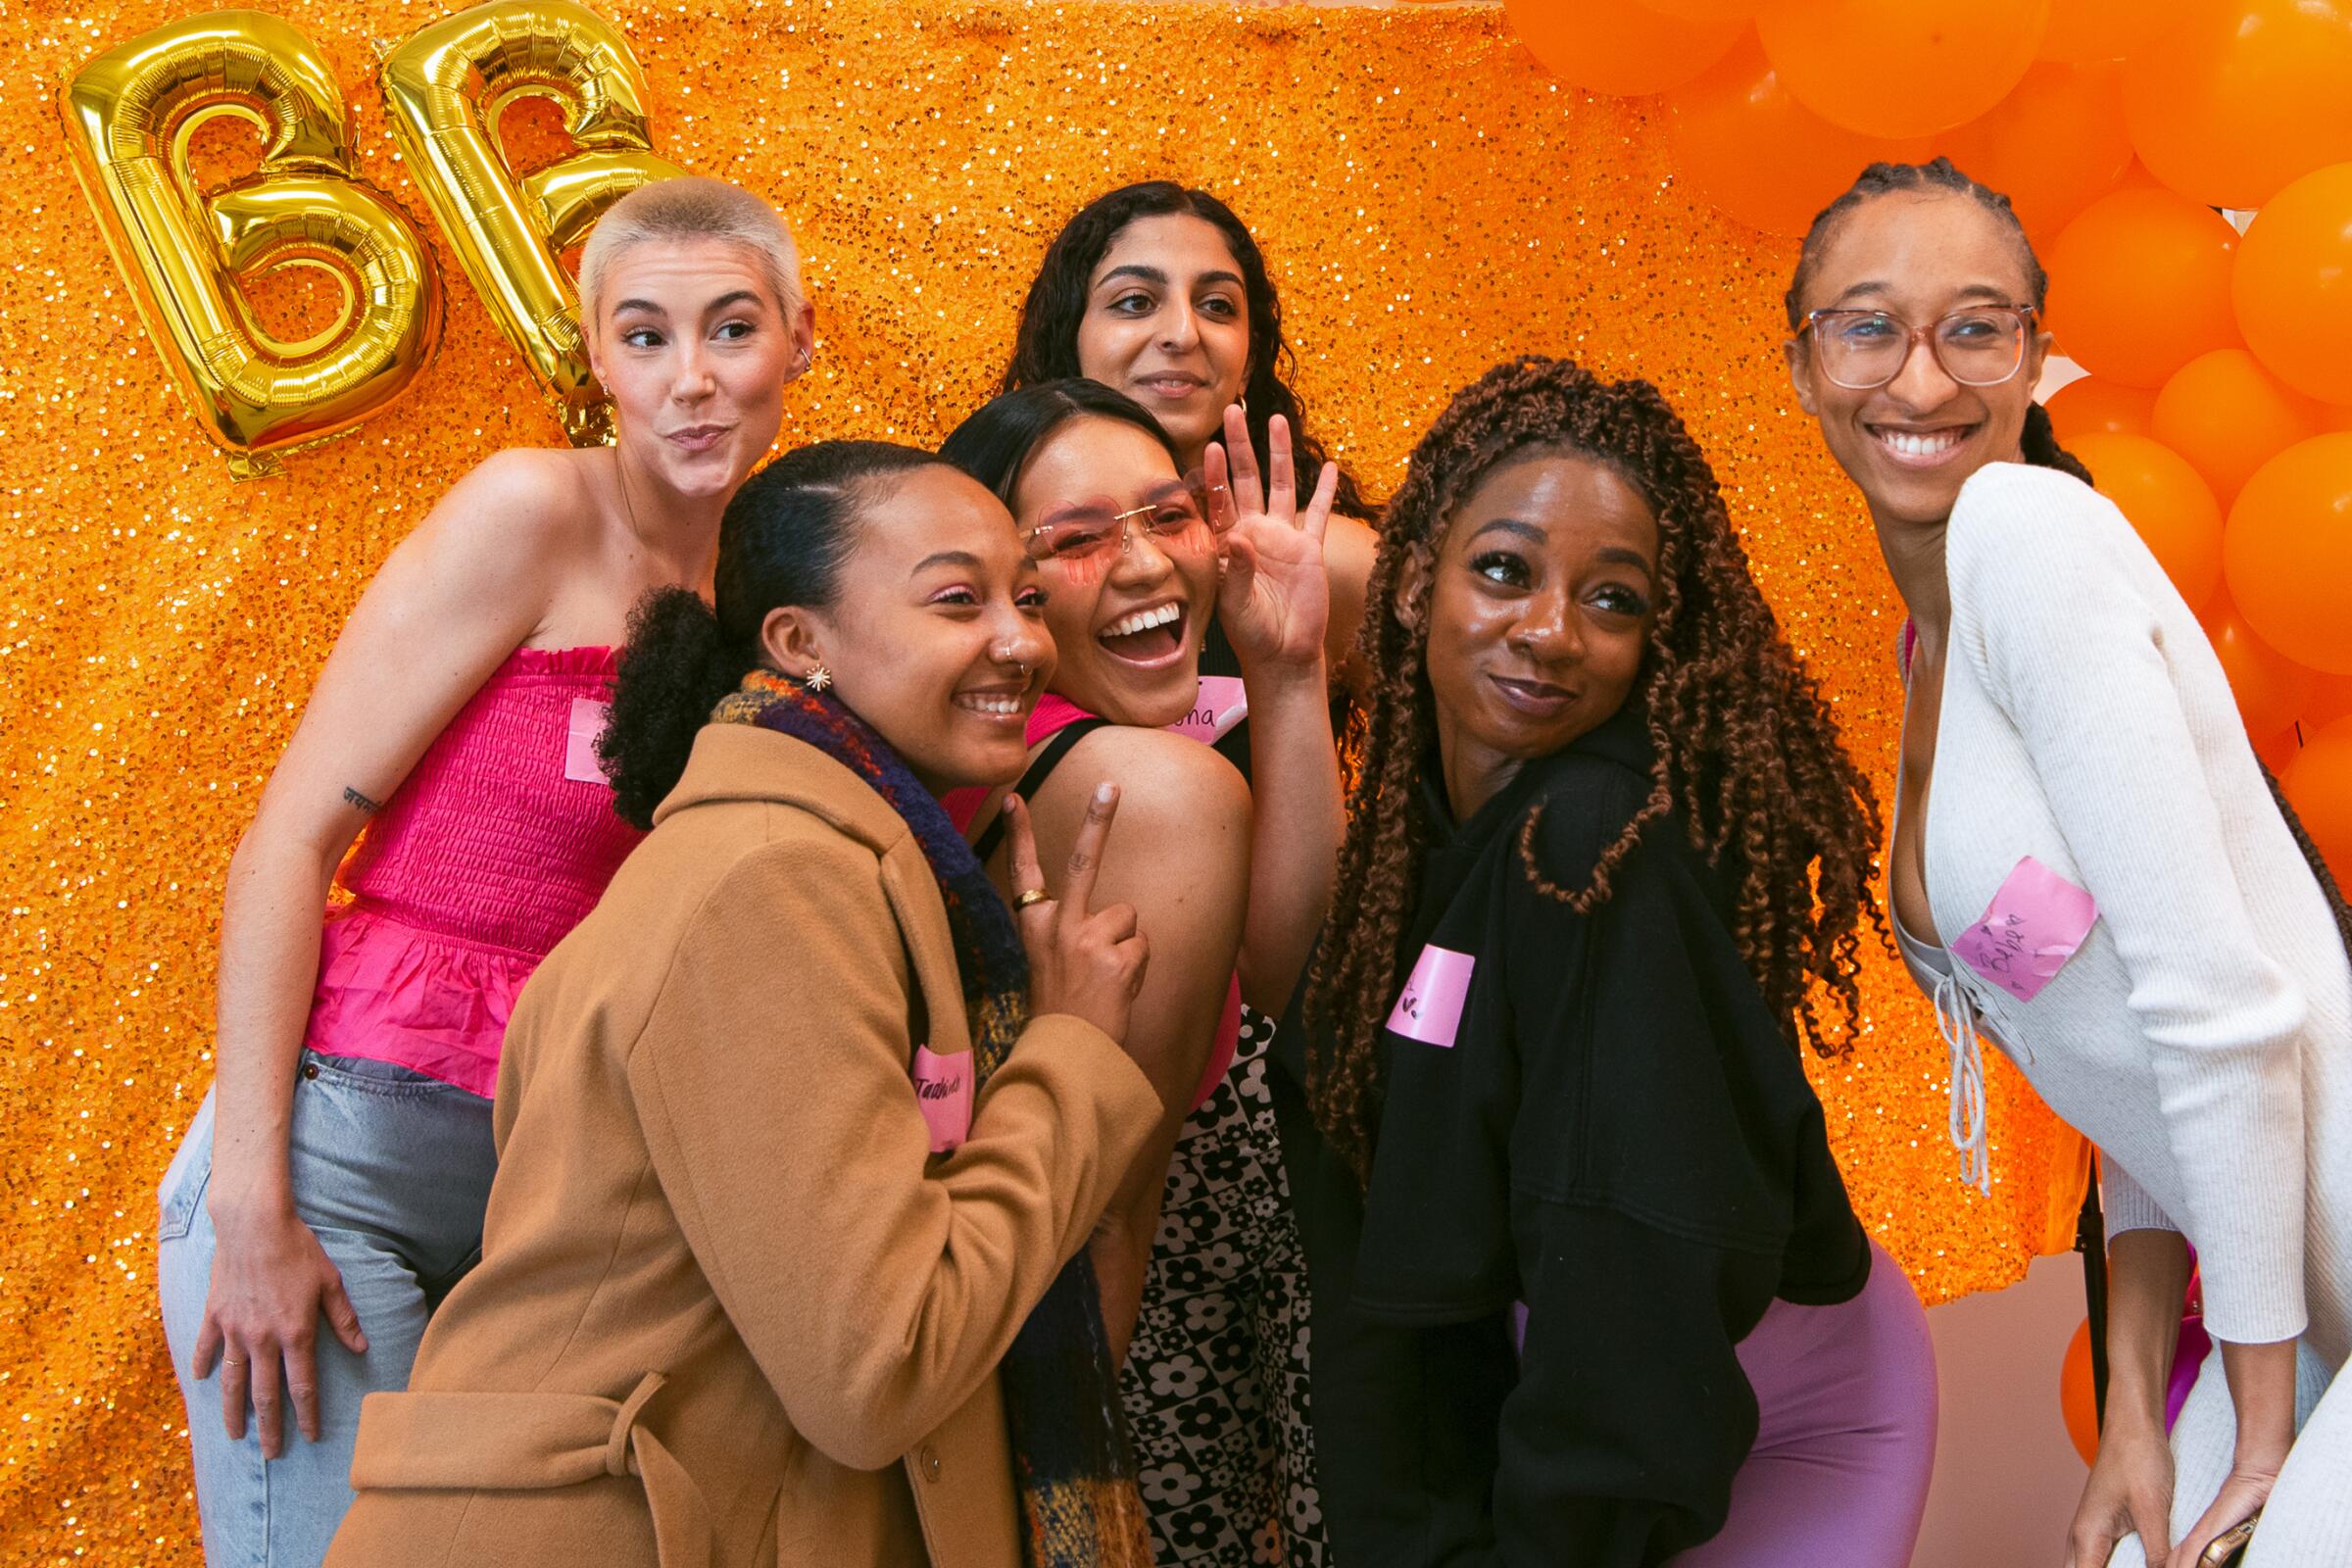 A group photo of women standing against an orange background, smiling